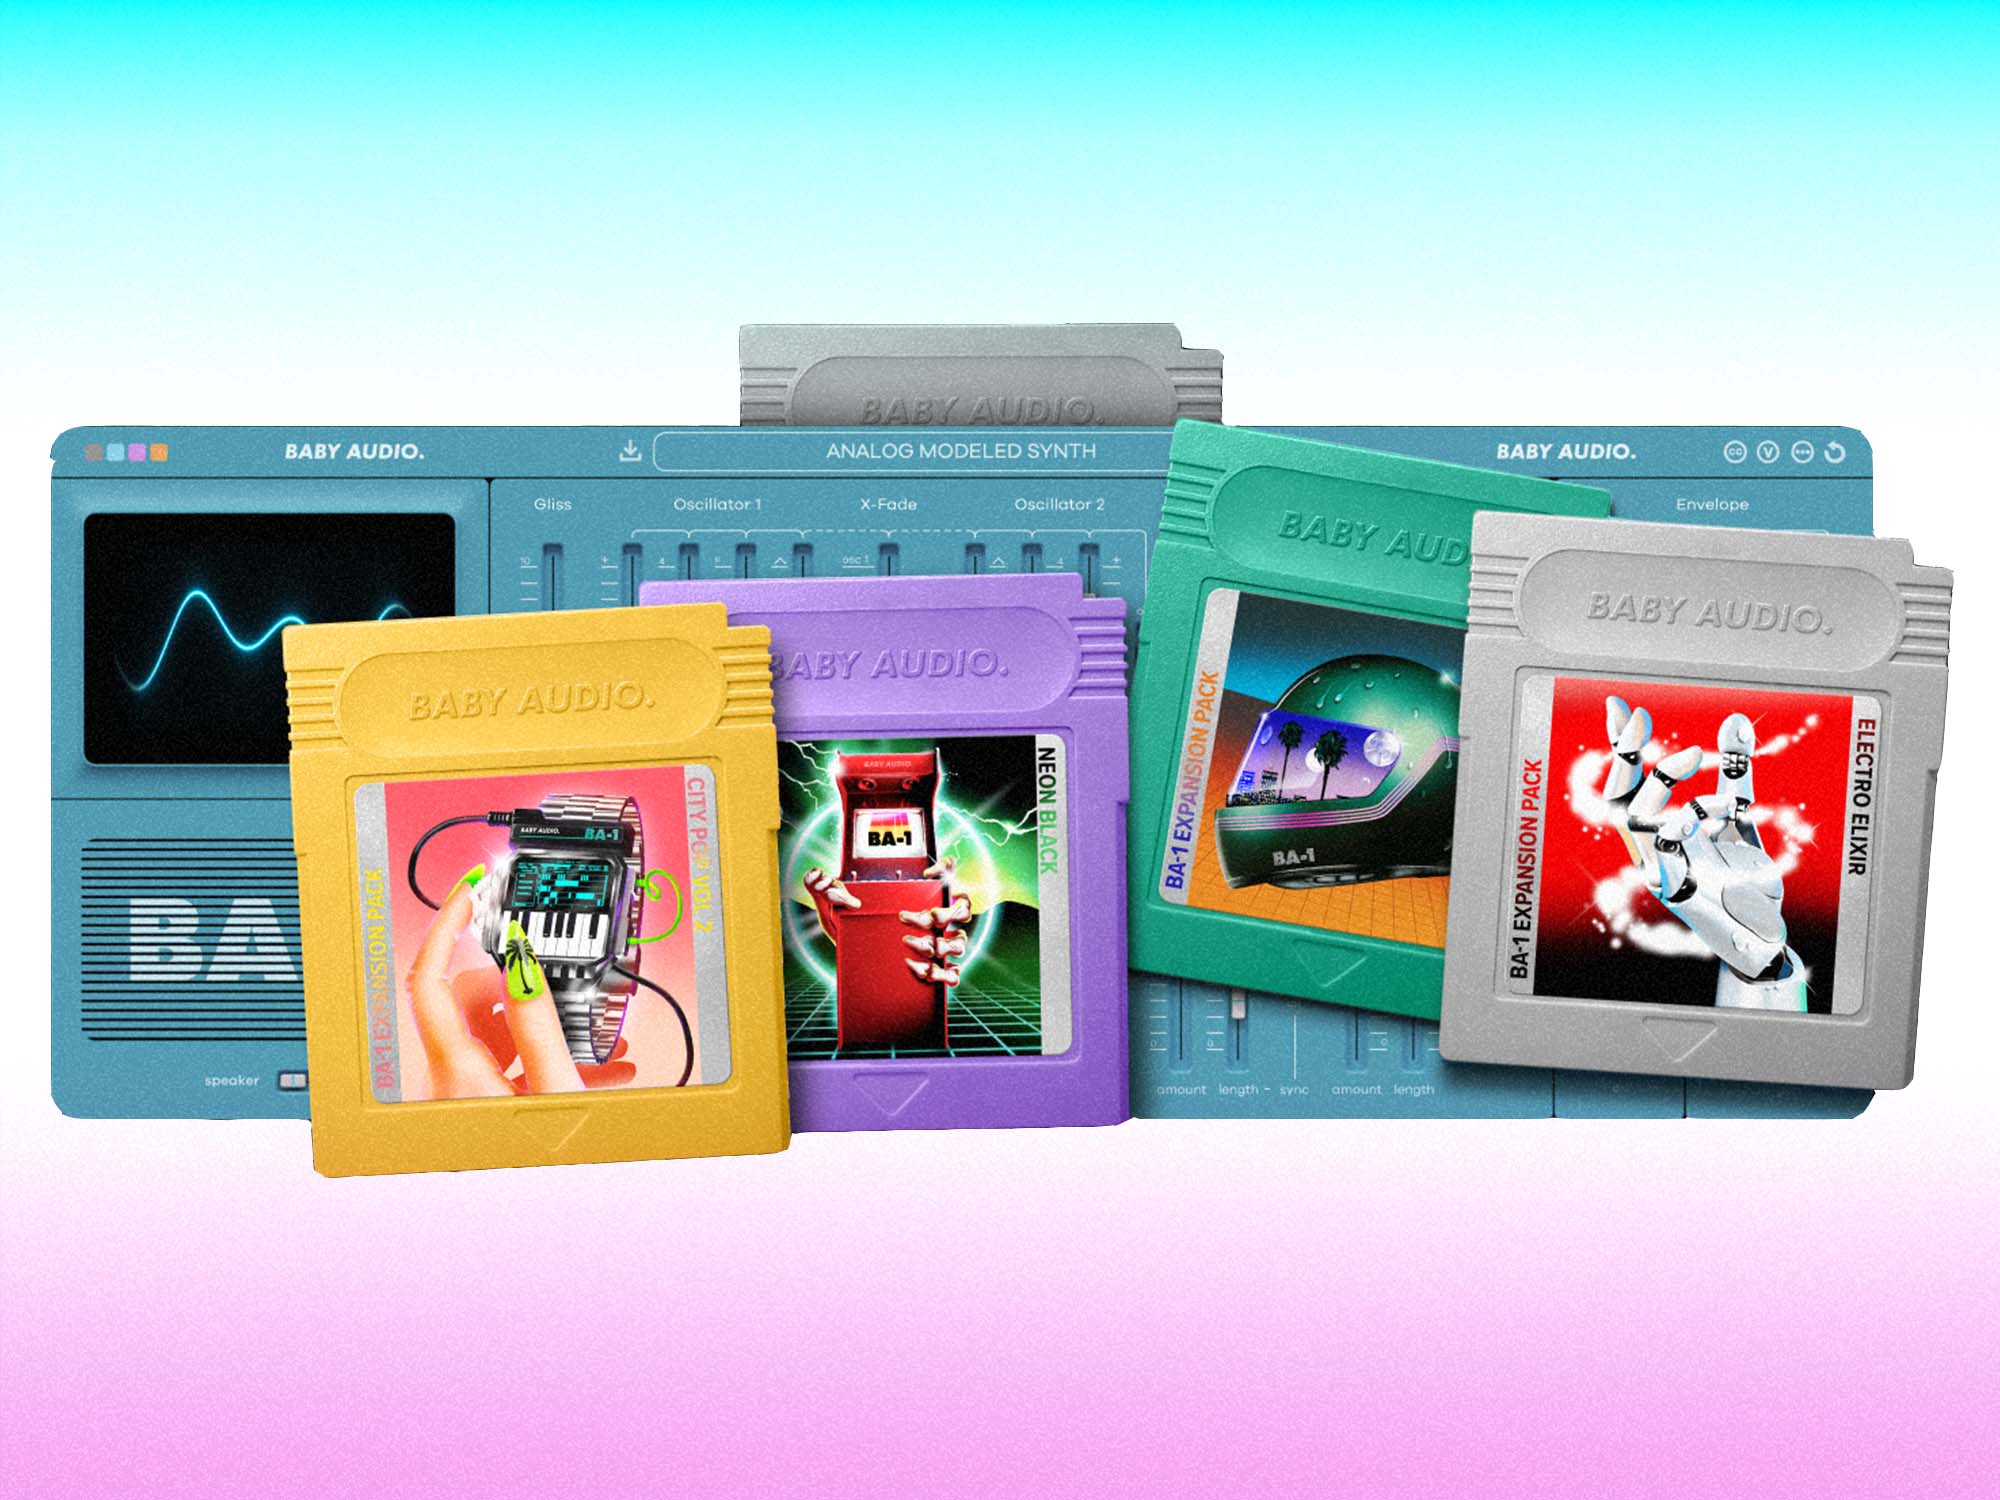 Baby Audio expansions packs which look like vintage game cards